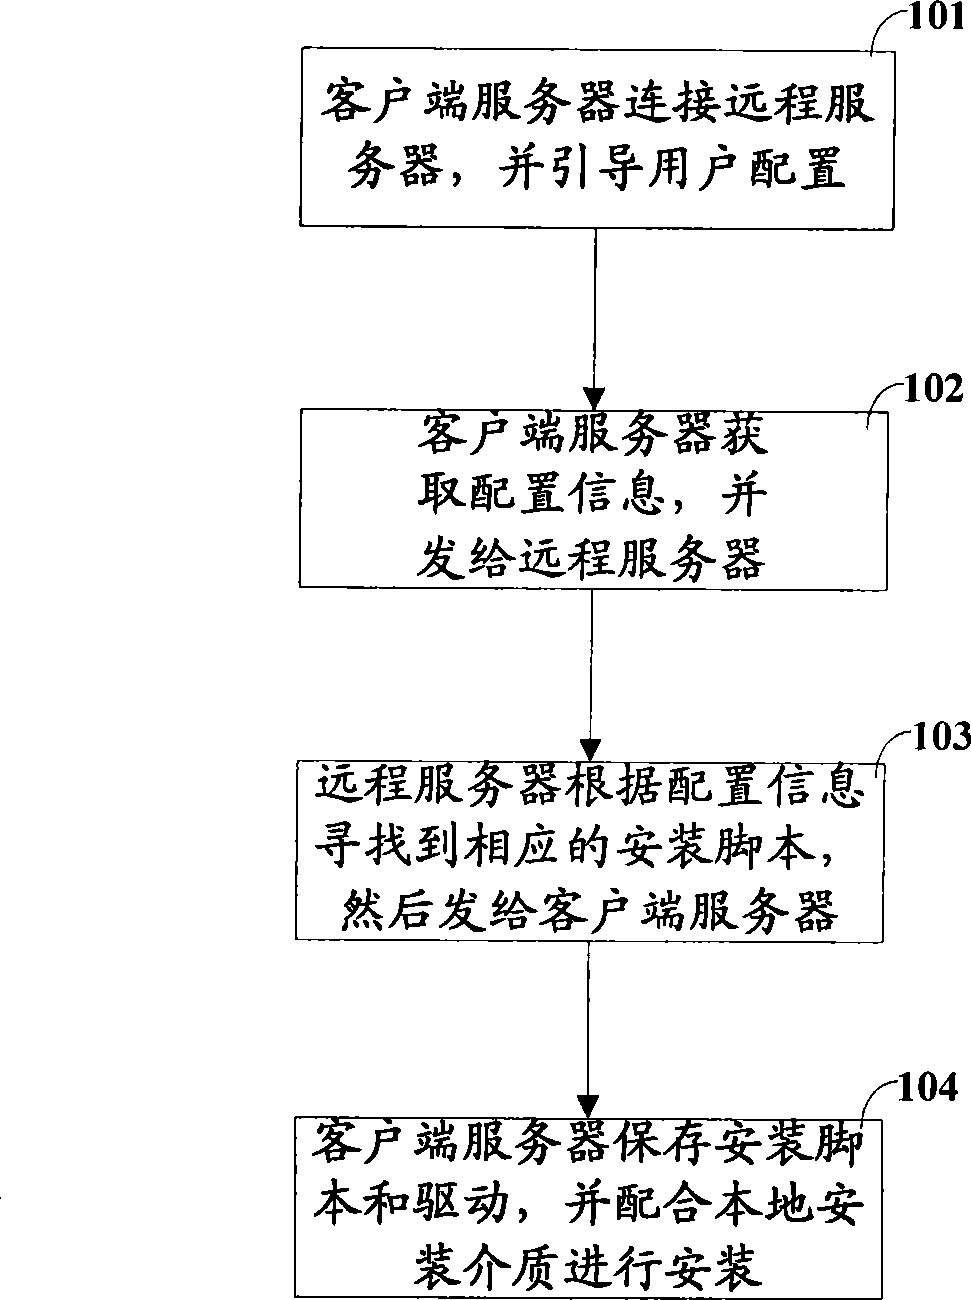 Method and device for automatic installing operating system on computer